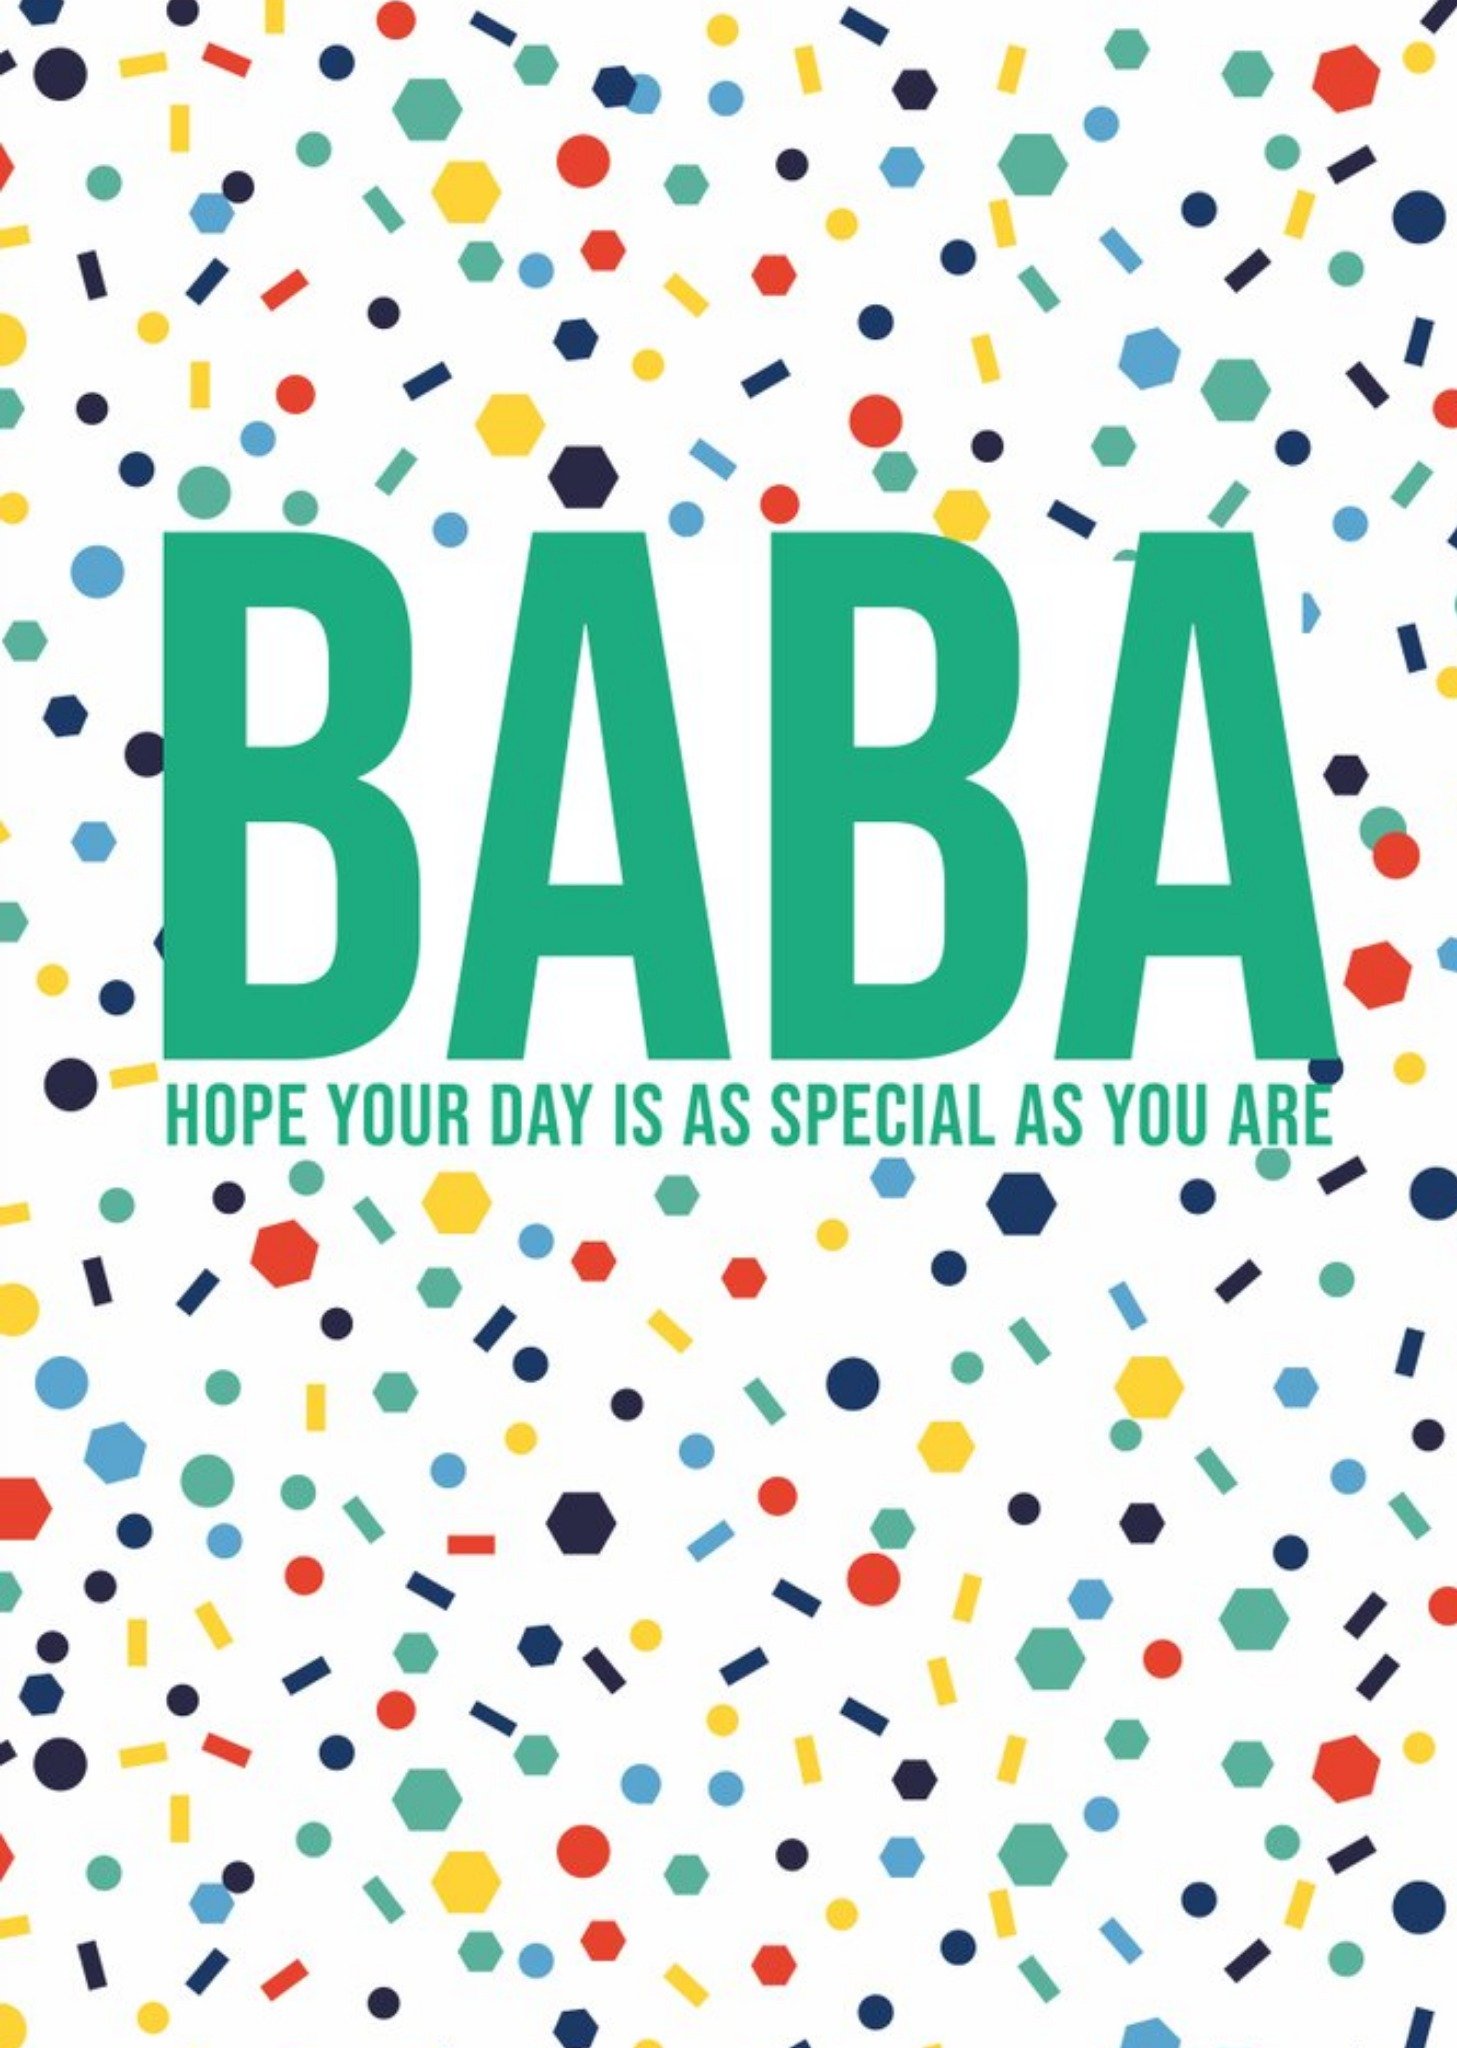 Eastern Print Studio Babba Hope Your Day Is As Special As You Are Birthday Card Ecard